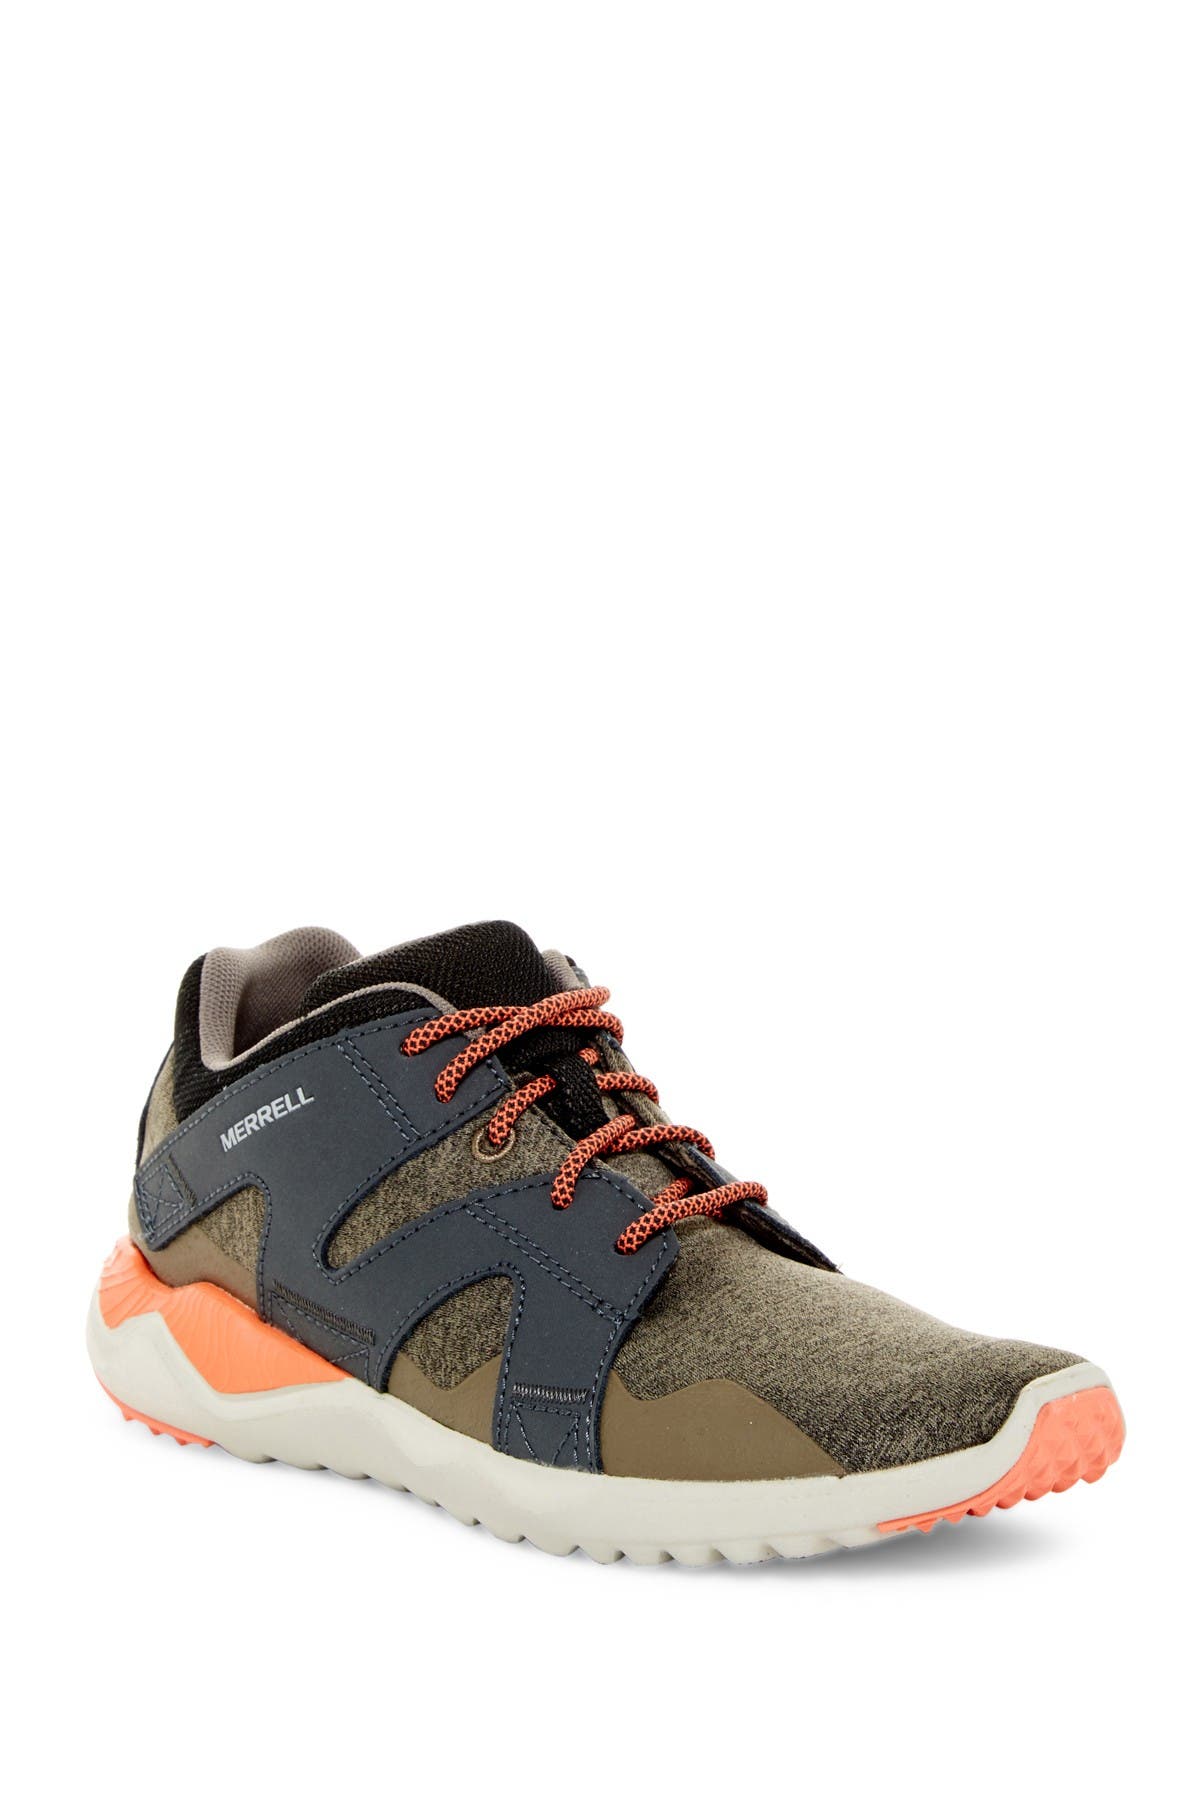 merrell 1six8 lace sneakers